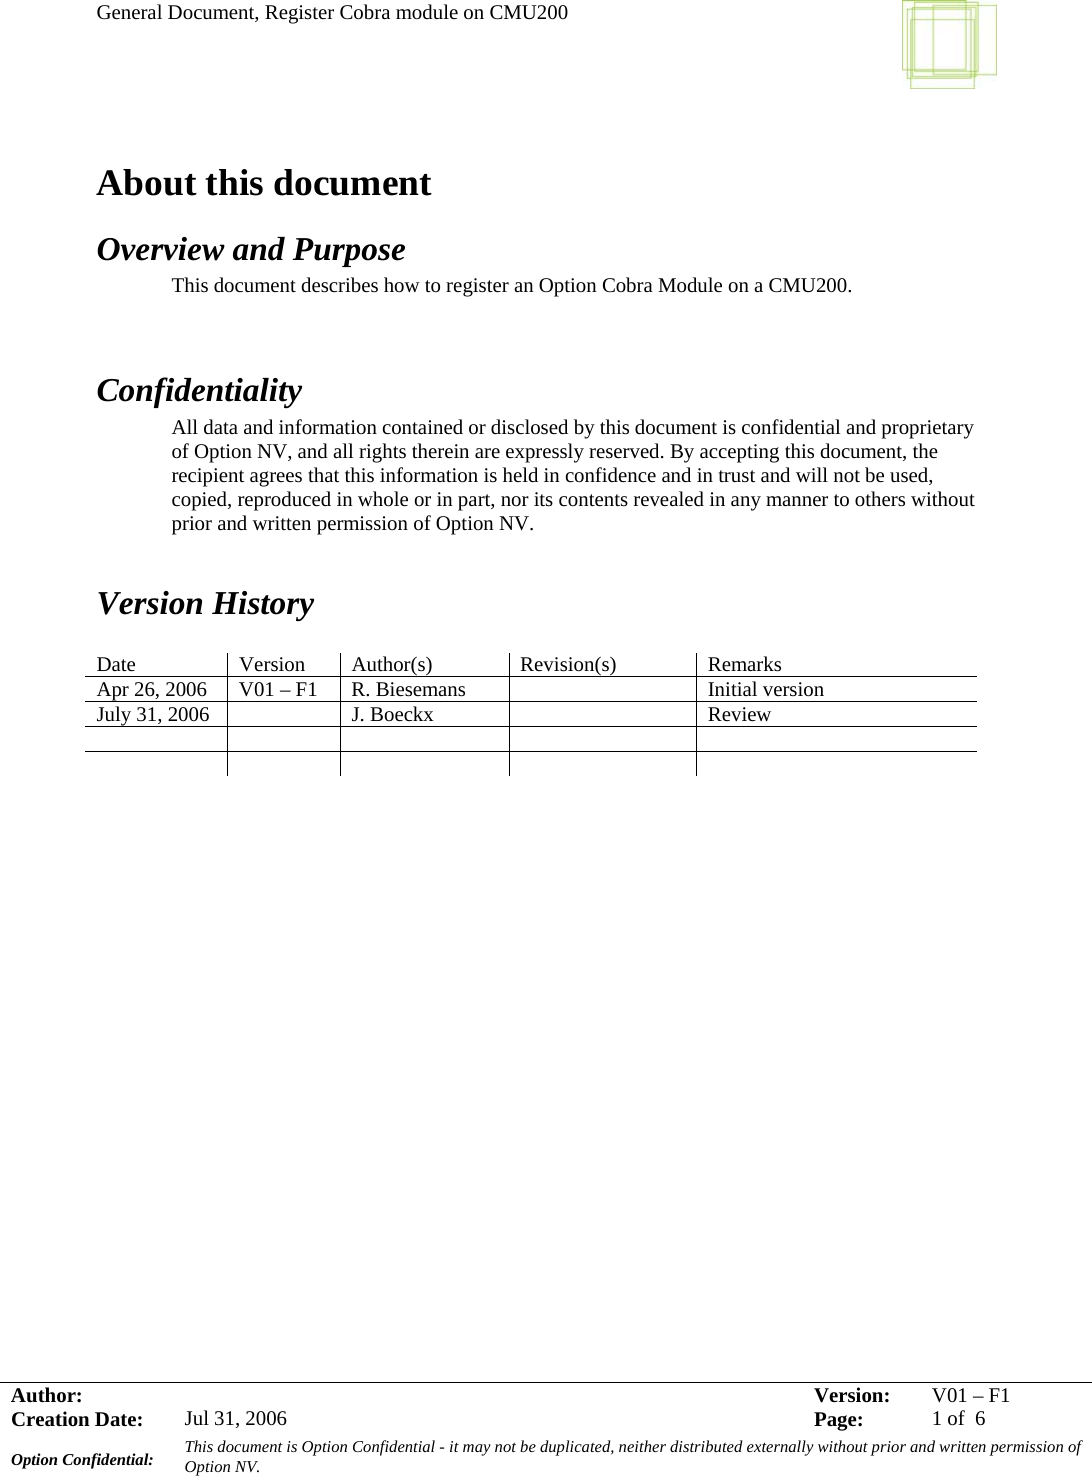 General Document, Register Cobra module on CMU200     Author:     Version:  V01 –F1Creation Date:  Jul 31, 2006    Page:  1 of  6 Option Confidential:  This document is Option Confidential - it may not be duplicated, neither distributed externally without prior and written permission of Option NV.    About this document Overview and Purpose This document describes how to register an Option Cobra Module on a CMU200.   Confidentiality All data and information contained or disclosed by this document is confidential and proprietary of Option NV, and all rights therein are expressly reserved. By accepting this document, the recipient agrees that this information is held in confidence and in trust and will not be used, copied, reproduced in whole or in part, nor its contents revealed in any manner to others without prior and written permission of Option NV.    Version History  Date Version Author(s) Revision(s) Remarks Apr 26, 2006  V01 – F1  R. Biesemans    Initial version July 31, 2006    J. Boeckx    Review                           